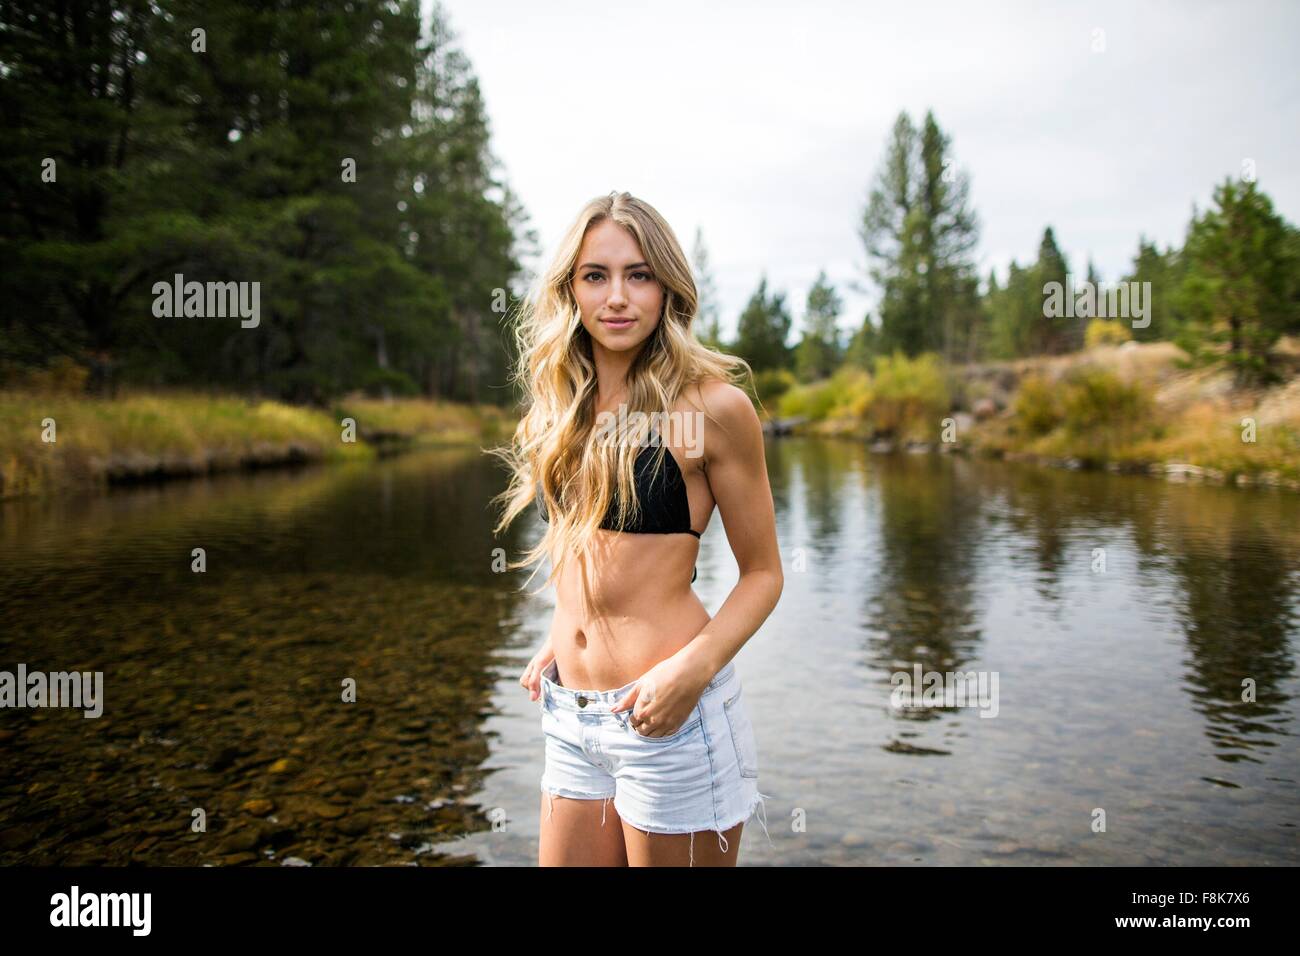 Portrait of young woman in river, Lake Tahoe, Nevada, USA Banque D'Images